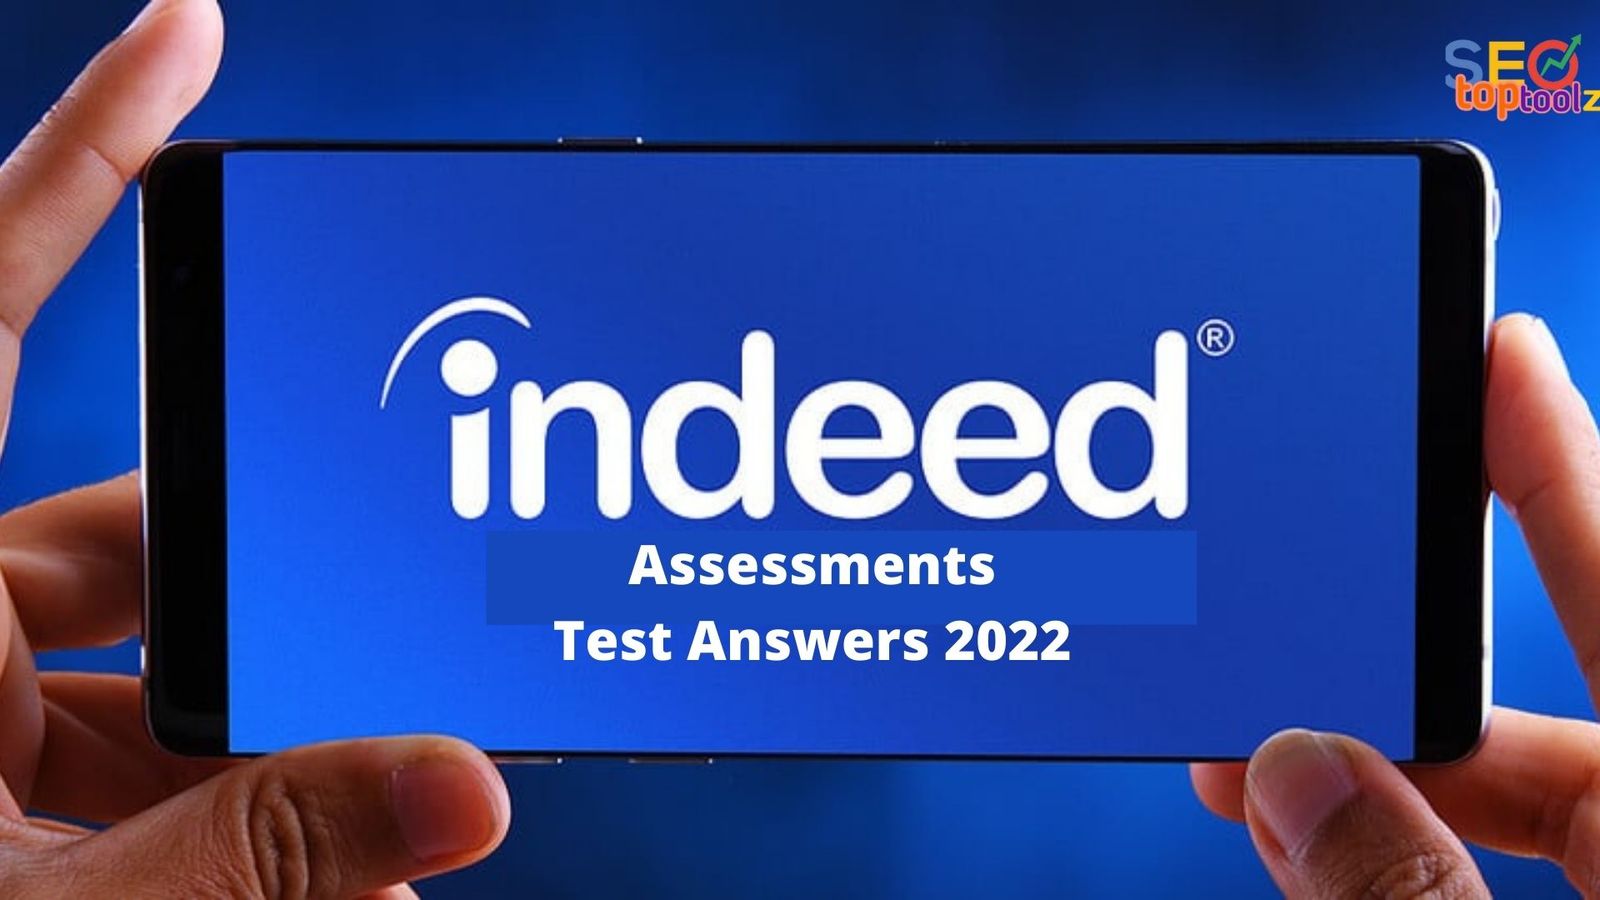 indeed-assessments-test-answers-2023-seotoptoolz